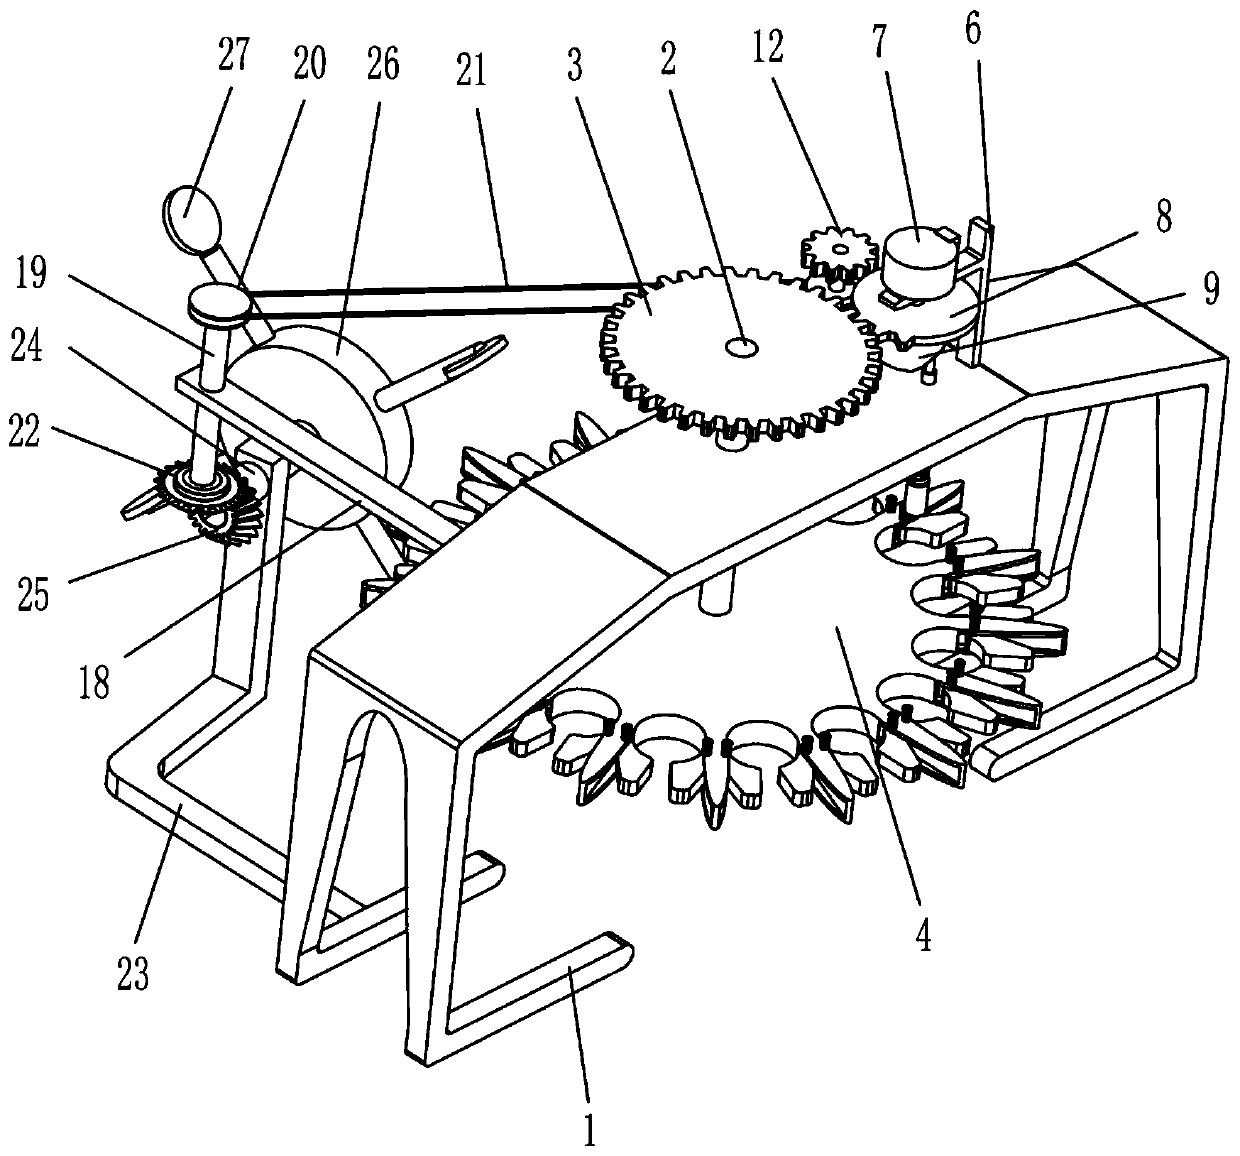 Bell pepper seed removing device